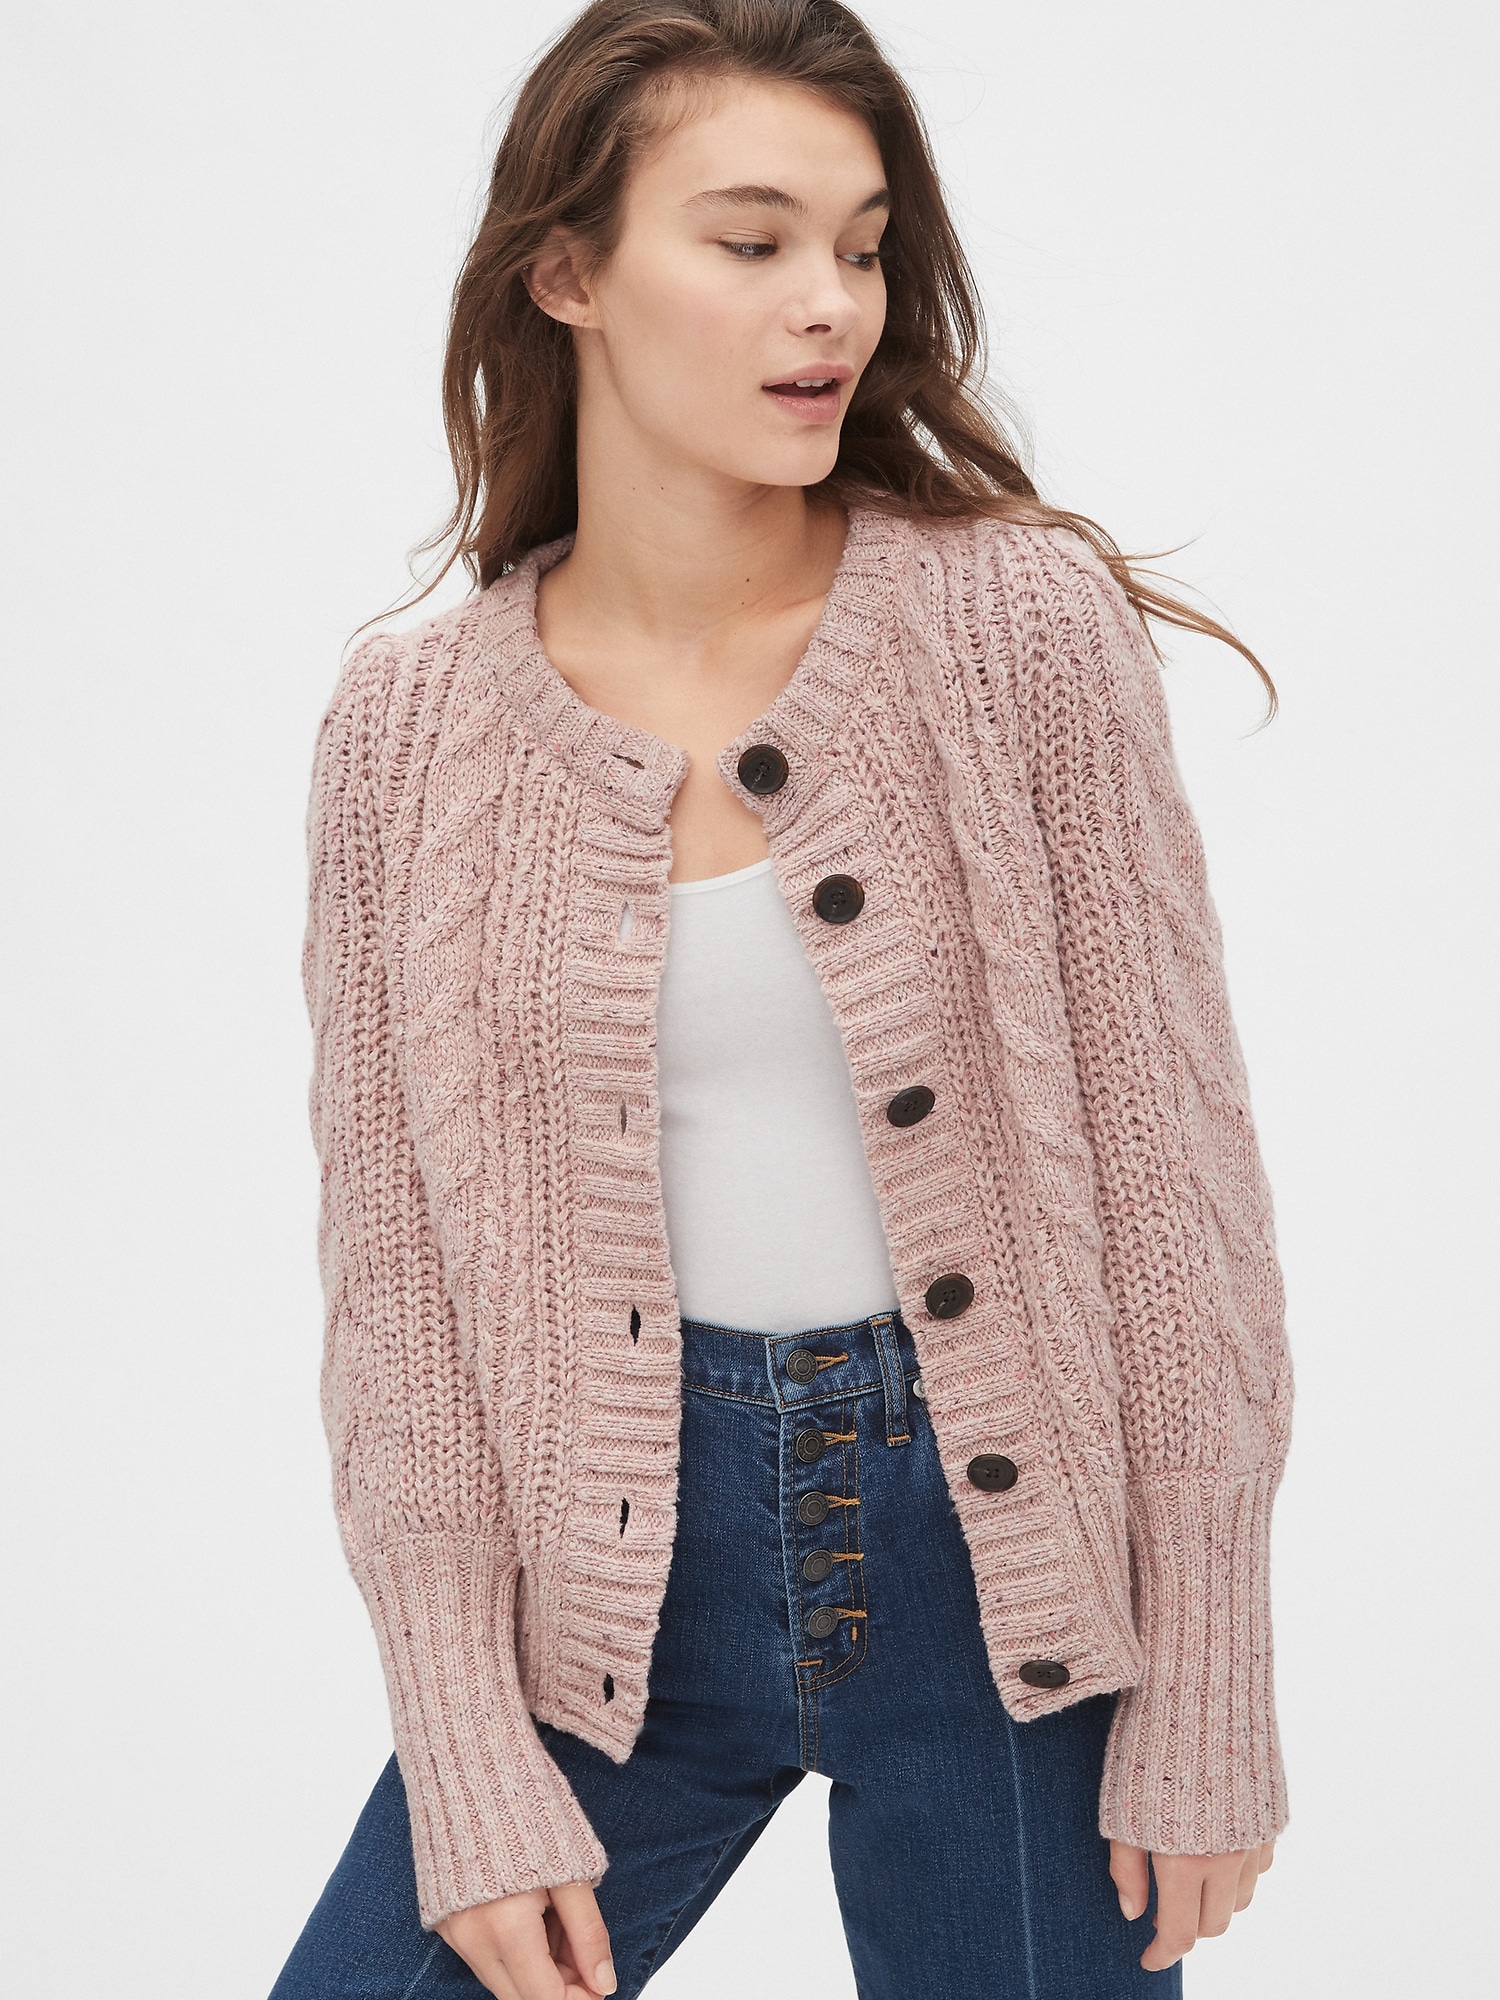 Chunky Cable-Knit Cardigan Sweater